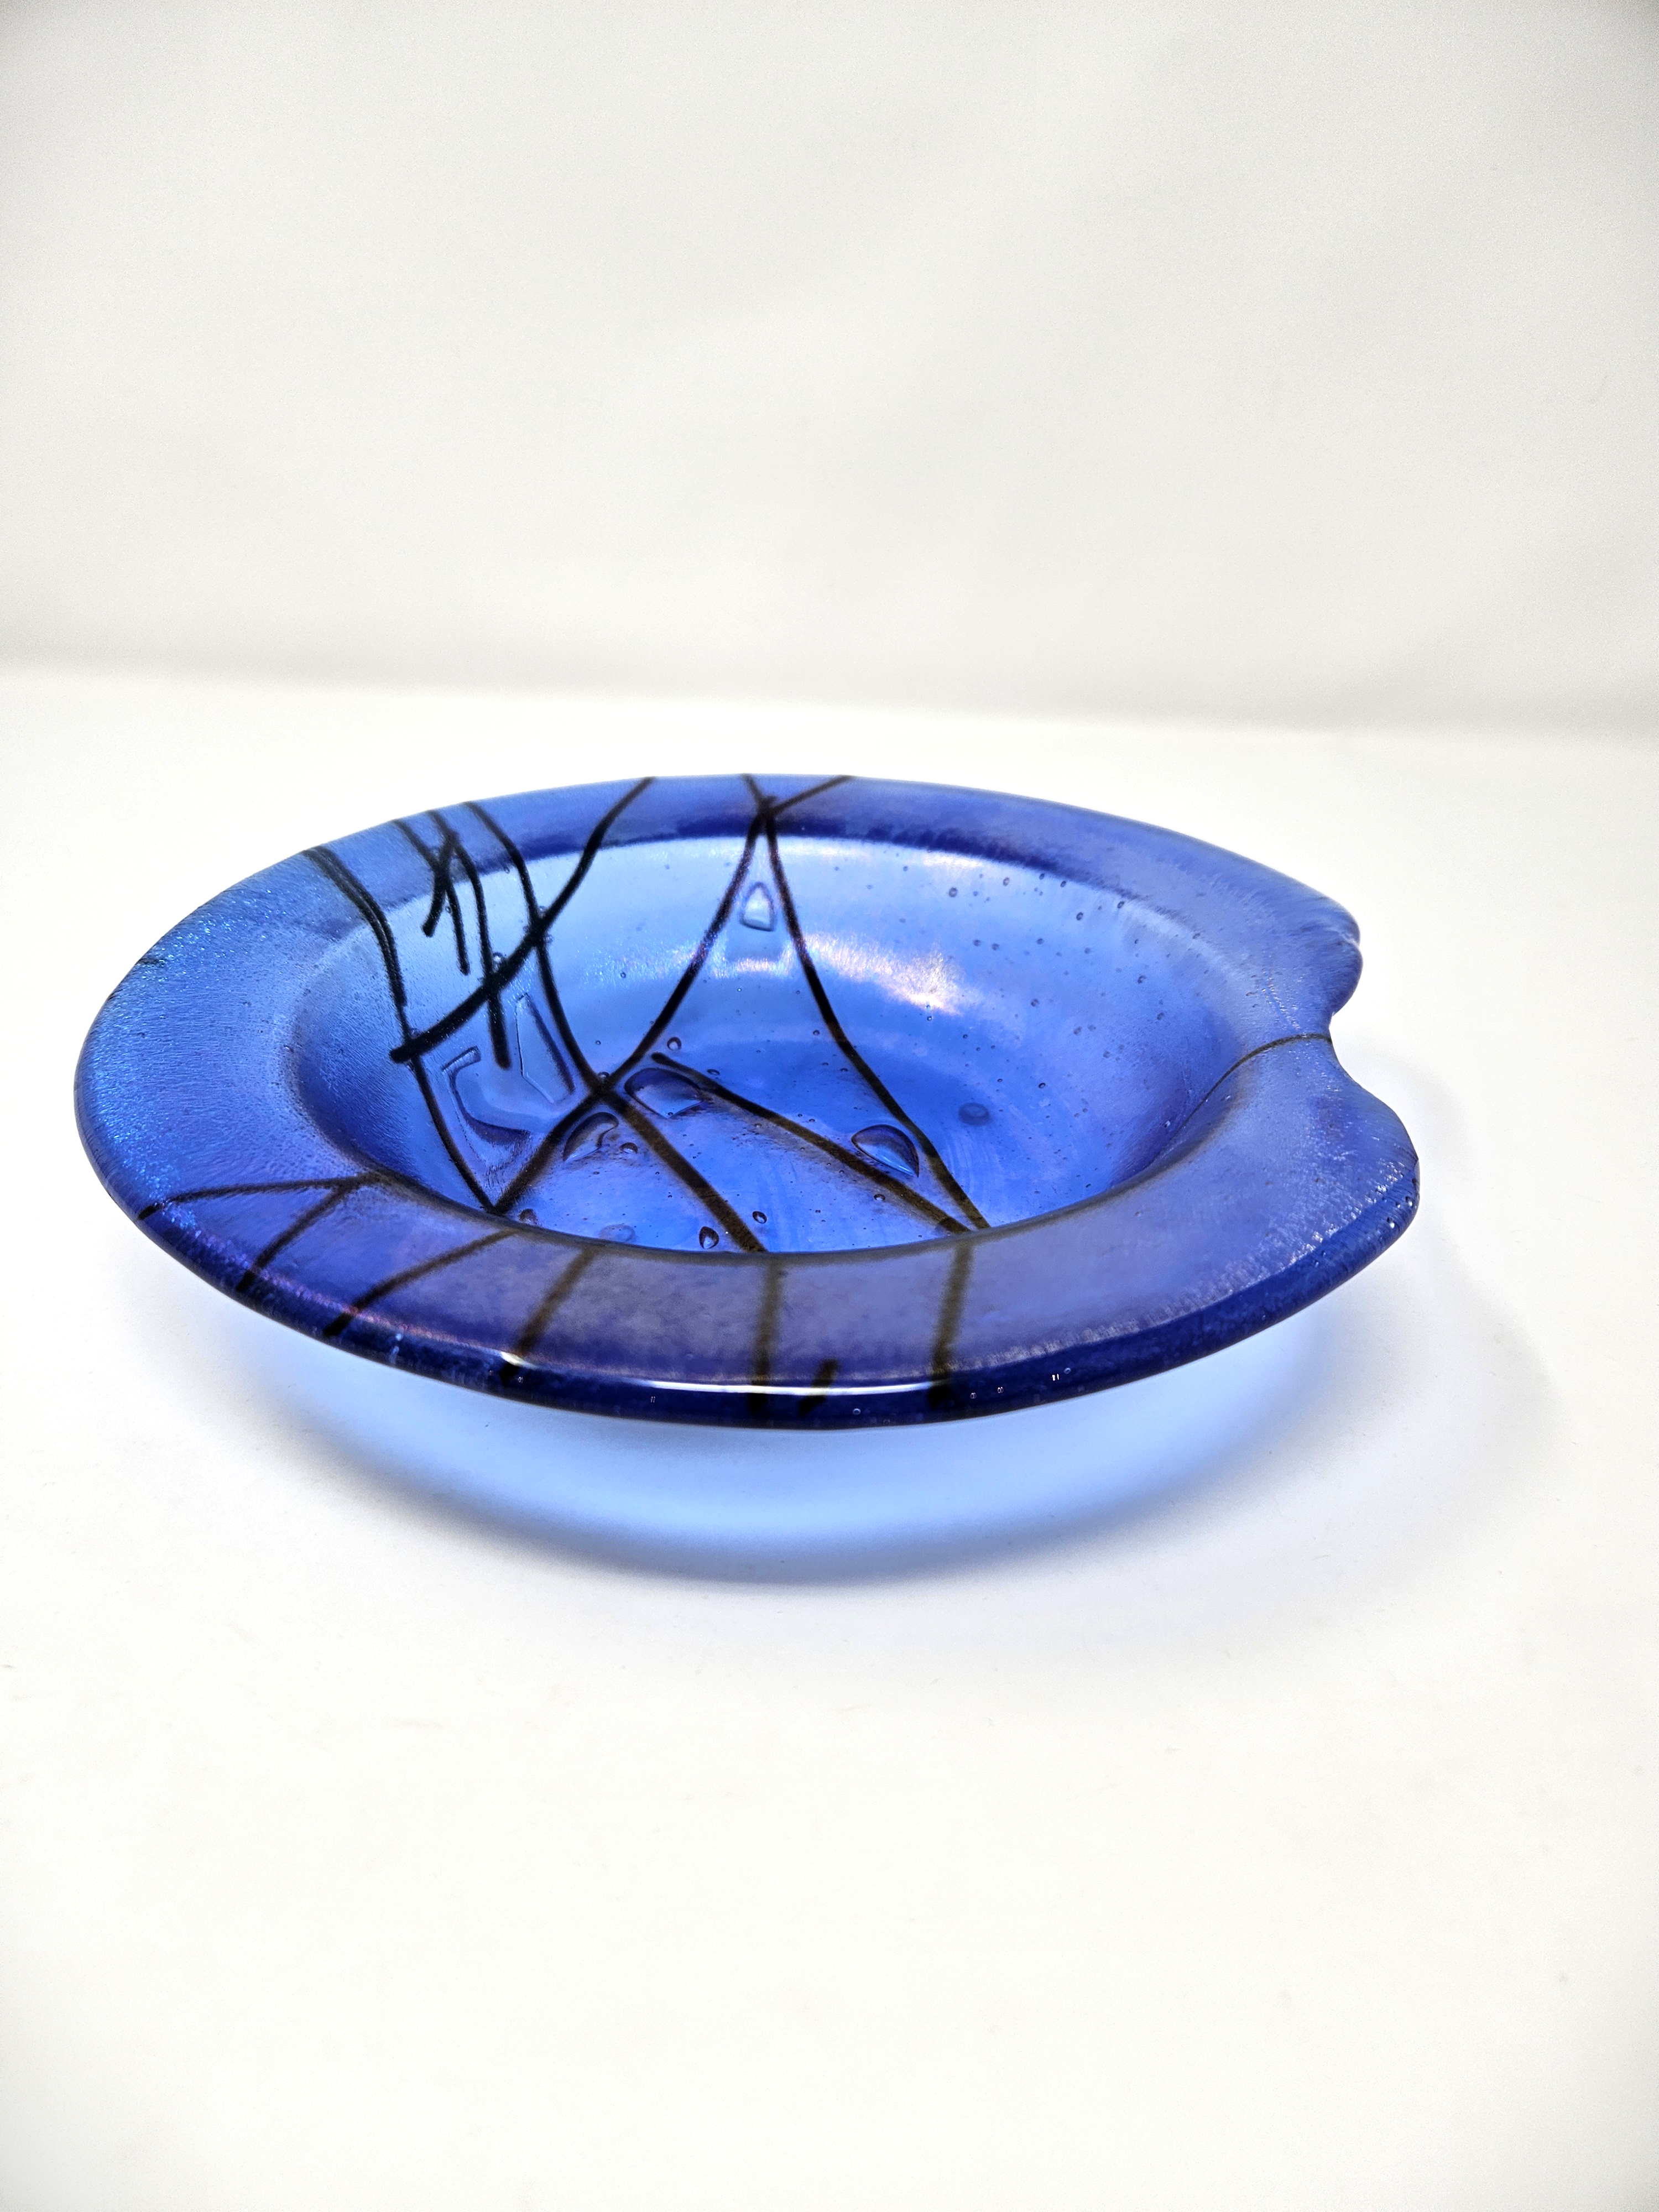 #159 Light Blue Iridescent Fused Soup Bowl by Mesolini Glass Studio